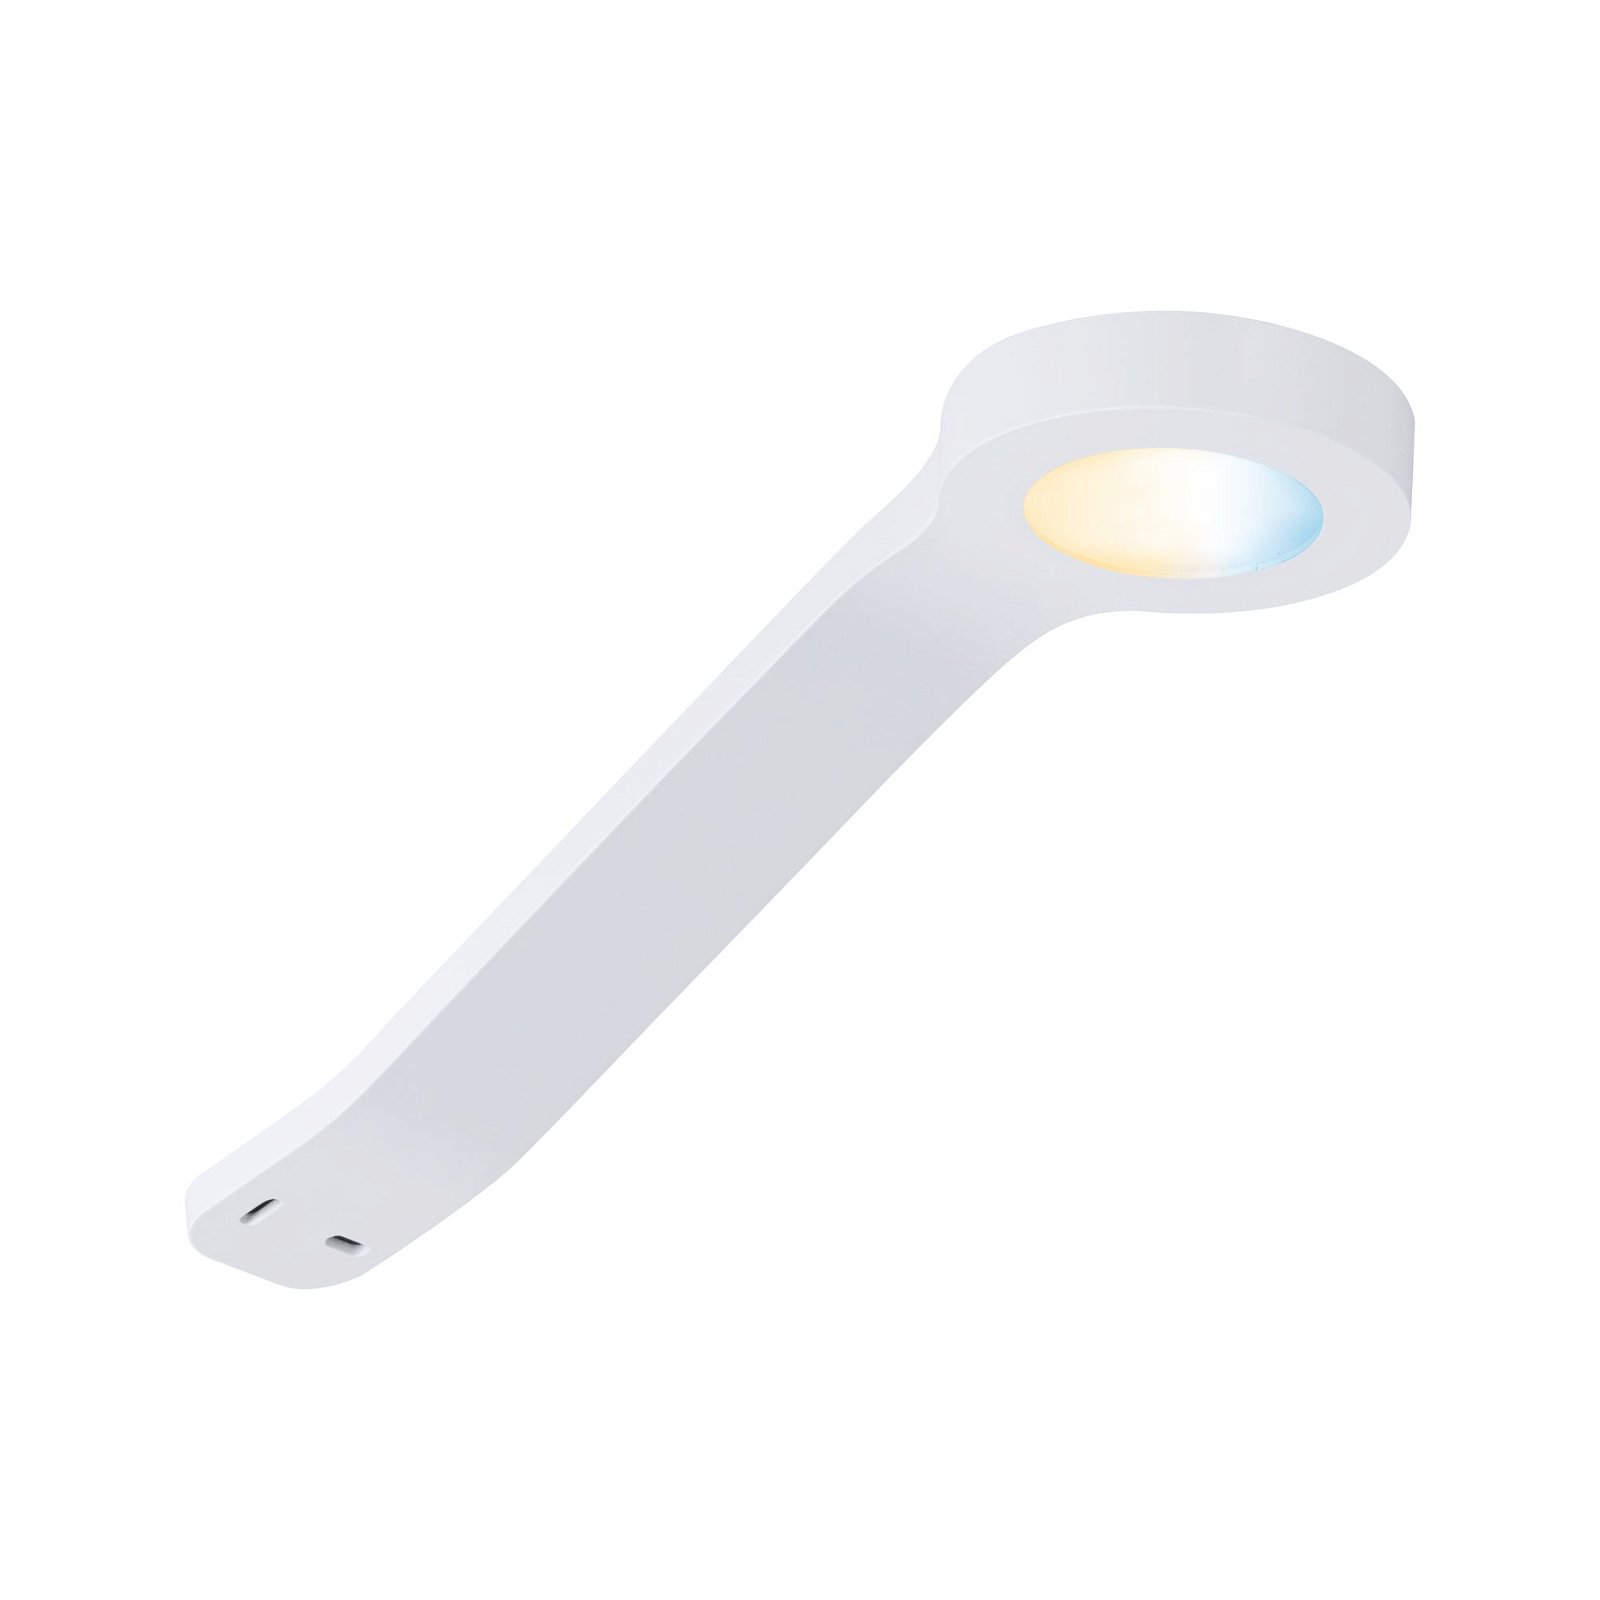 Clever Connect LED Spot Mike Tunable White 2x2,5W 12VA Weiß matt